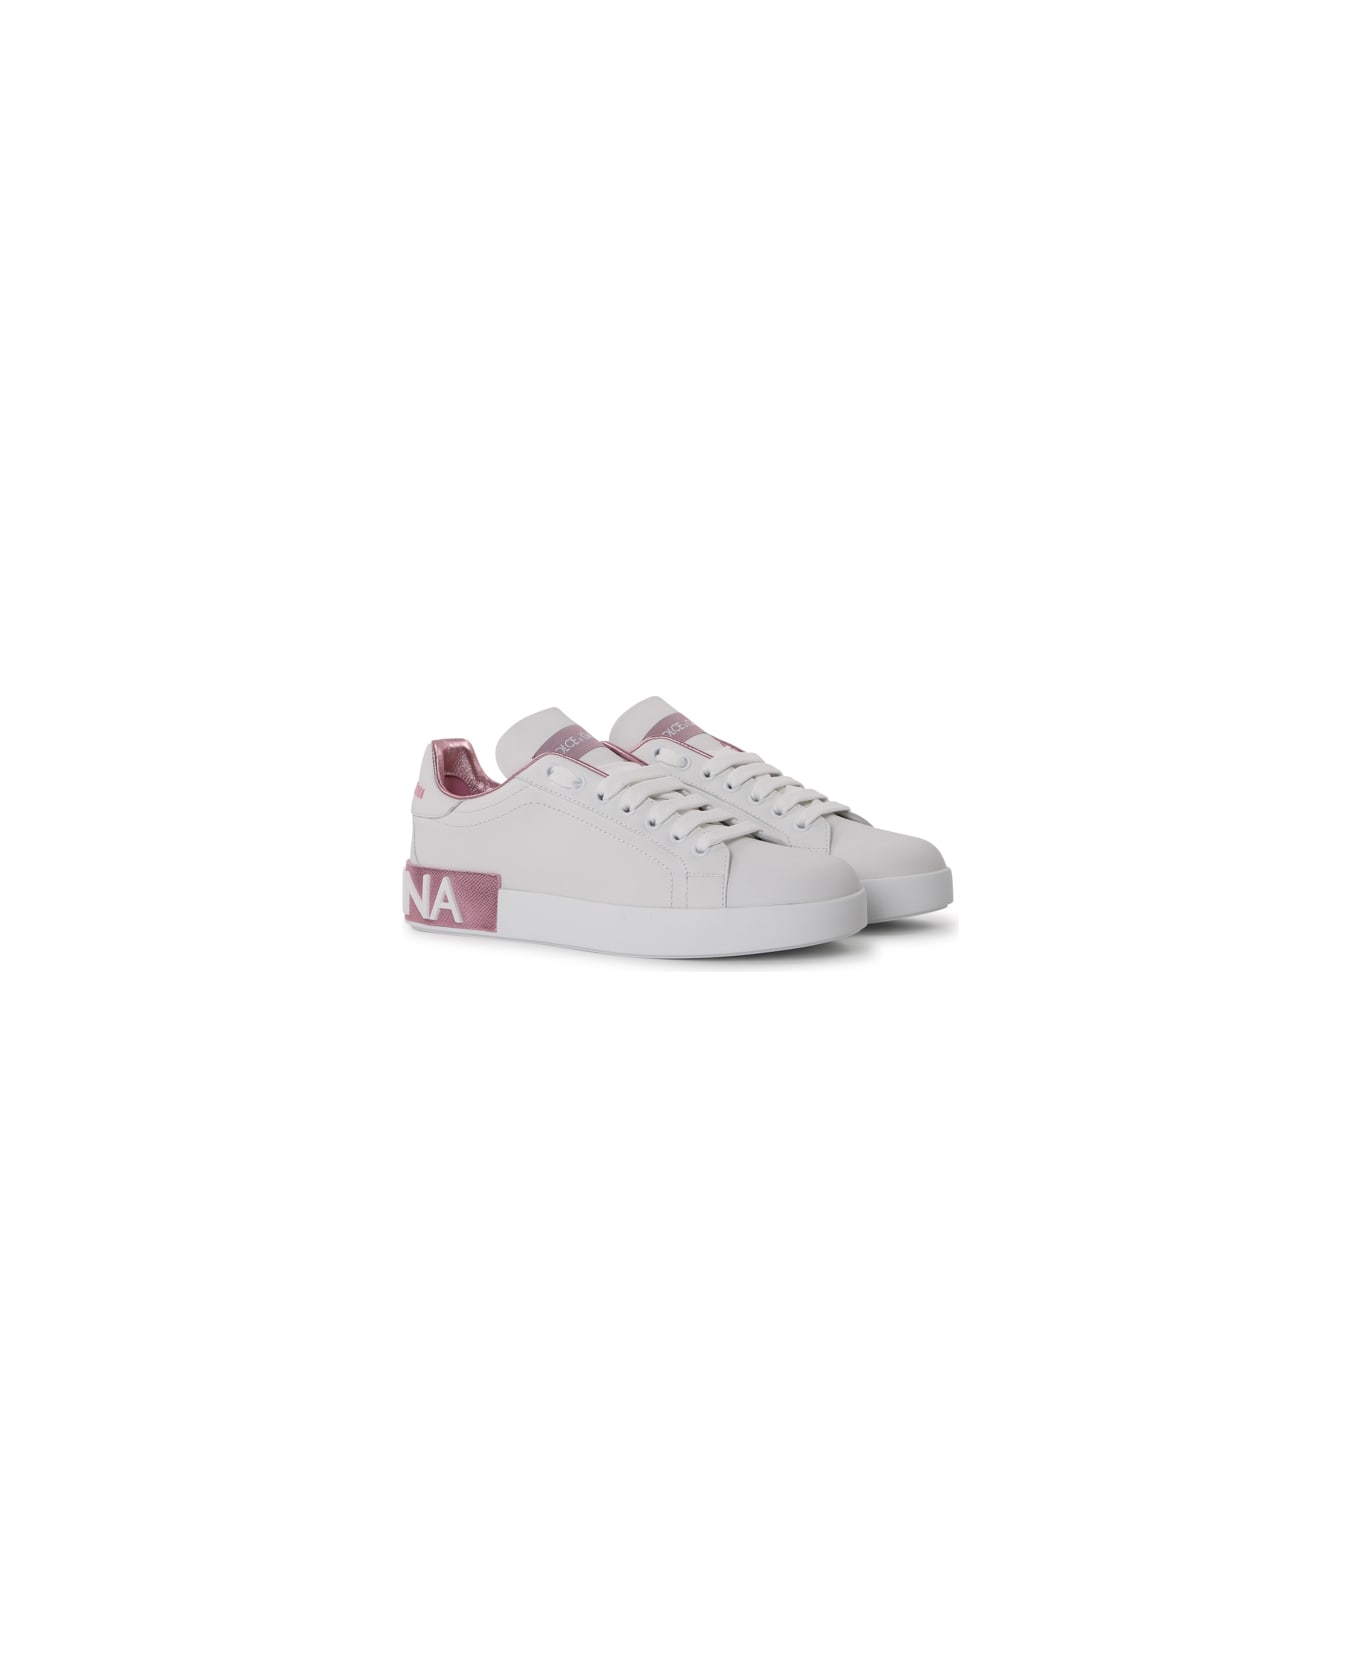 Dolce & Gabbana Portofino Sneakers In Leather With Contrasting Inserts - White/pink